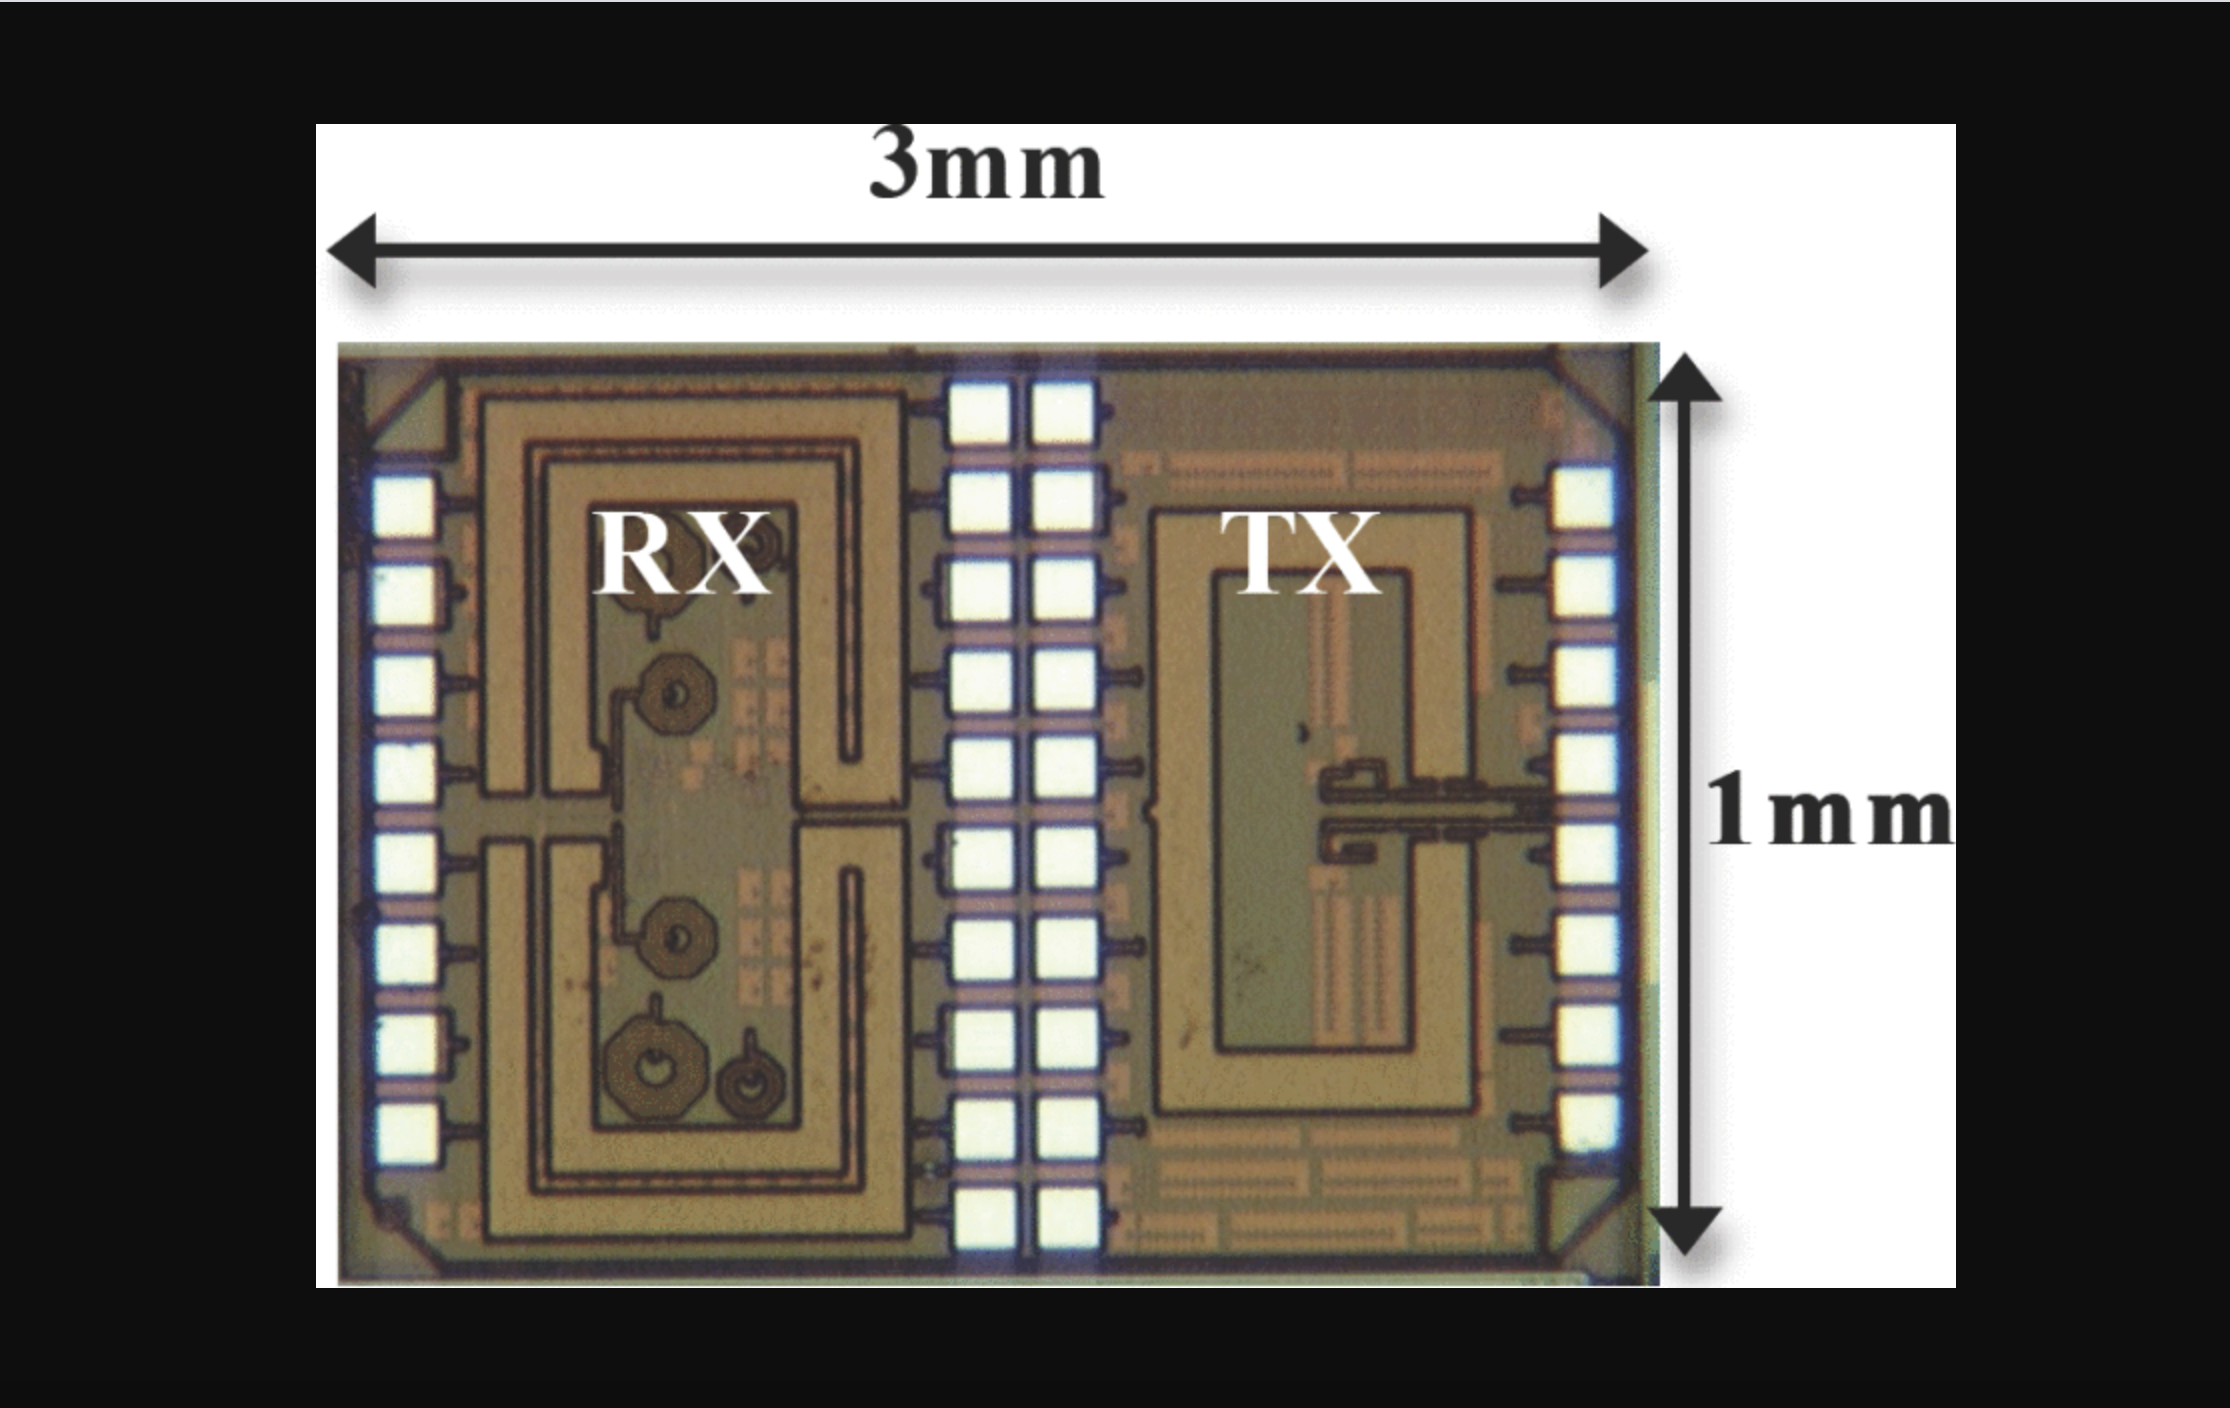 Co-design of on-chip antennas and circuits for a UNII band monolithic transceiver